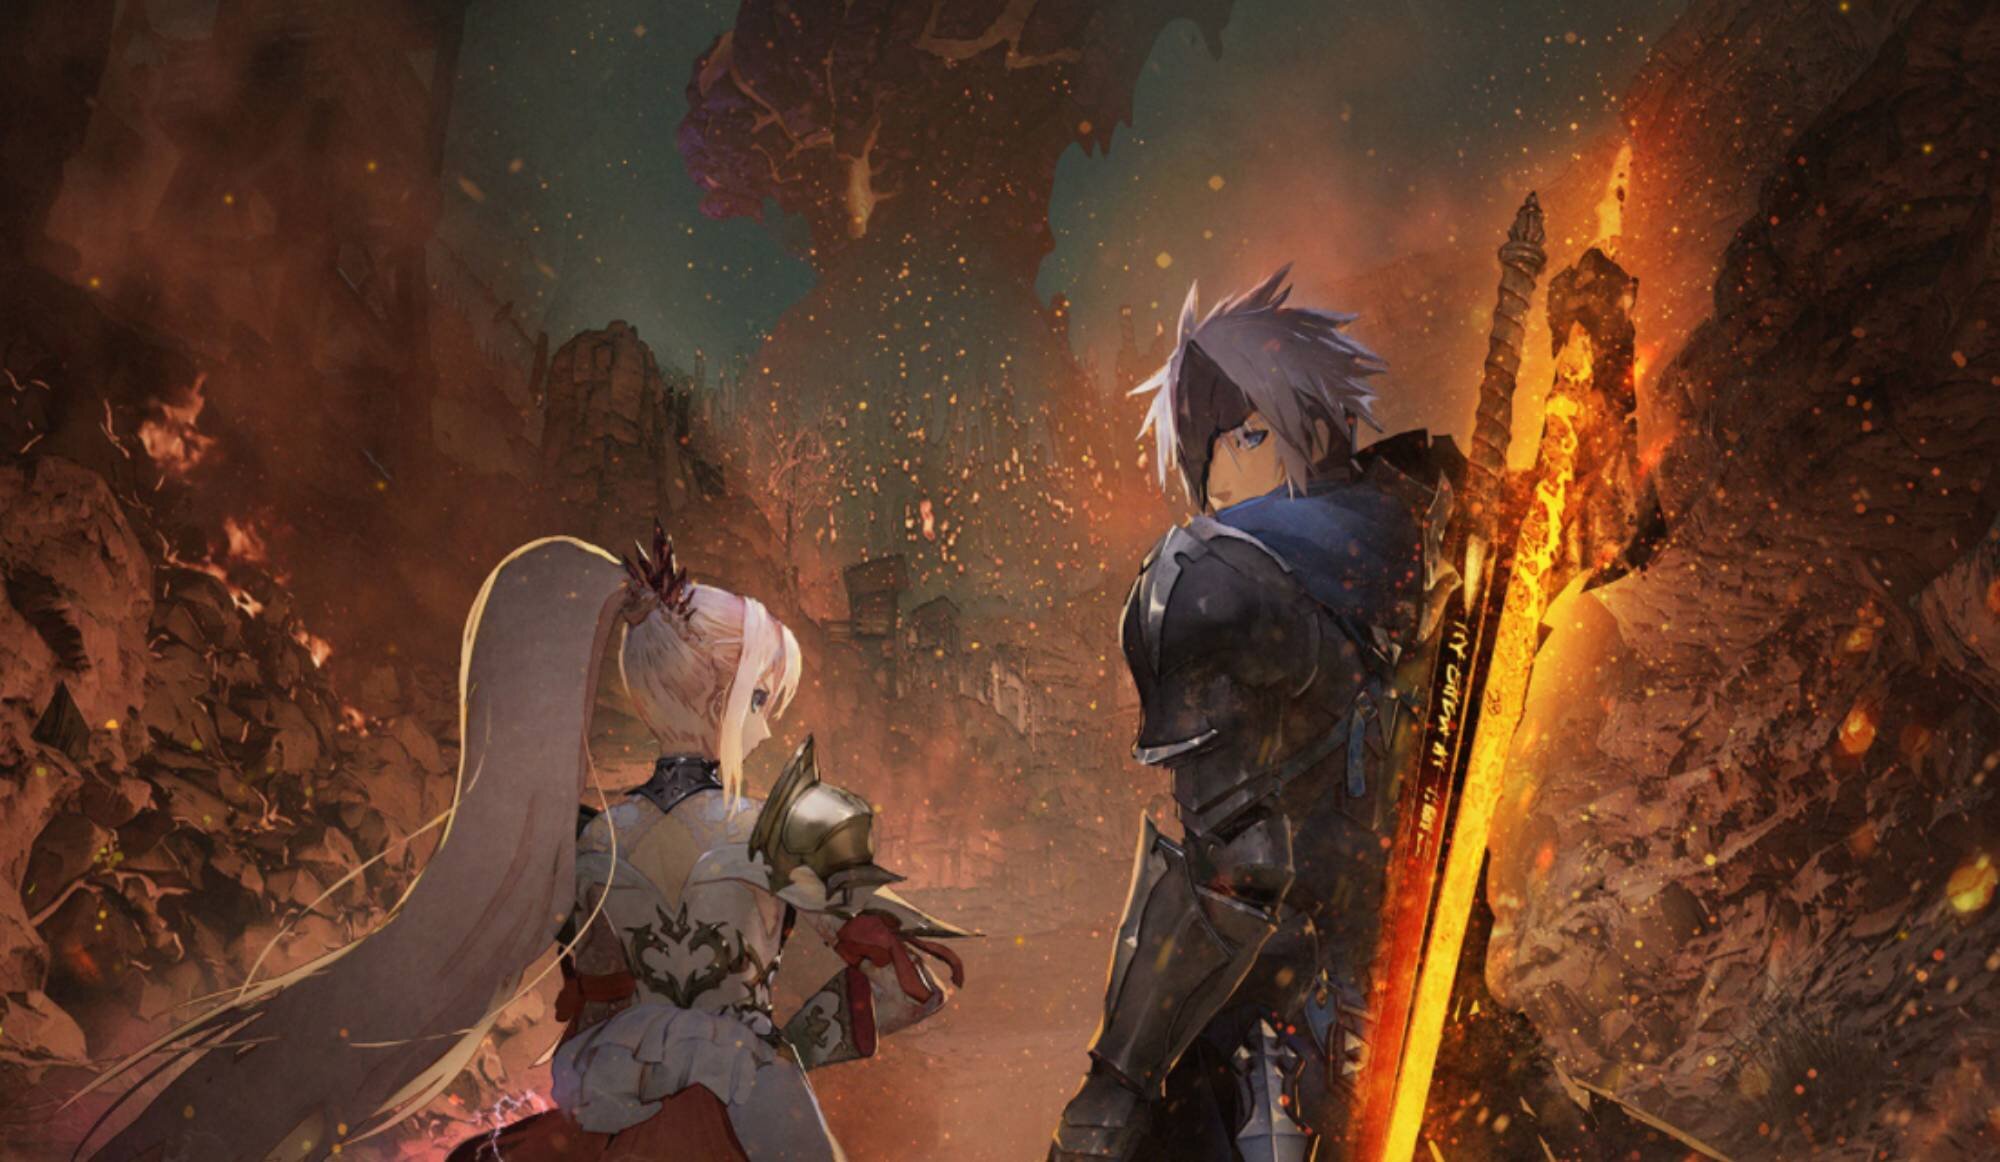 Tales of Arise: Where the Two Planets Collide